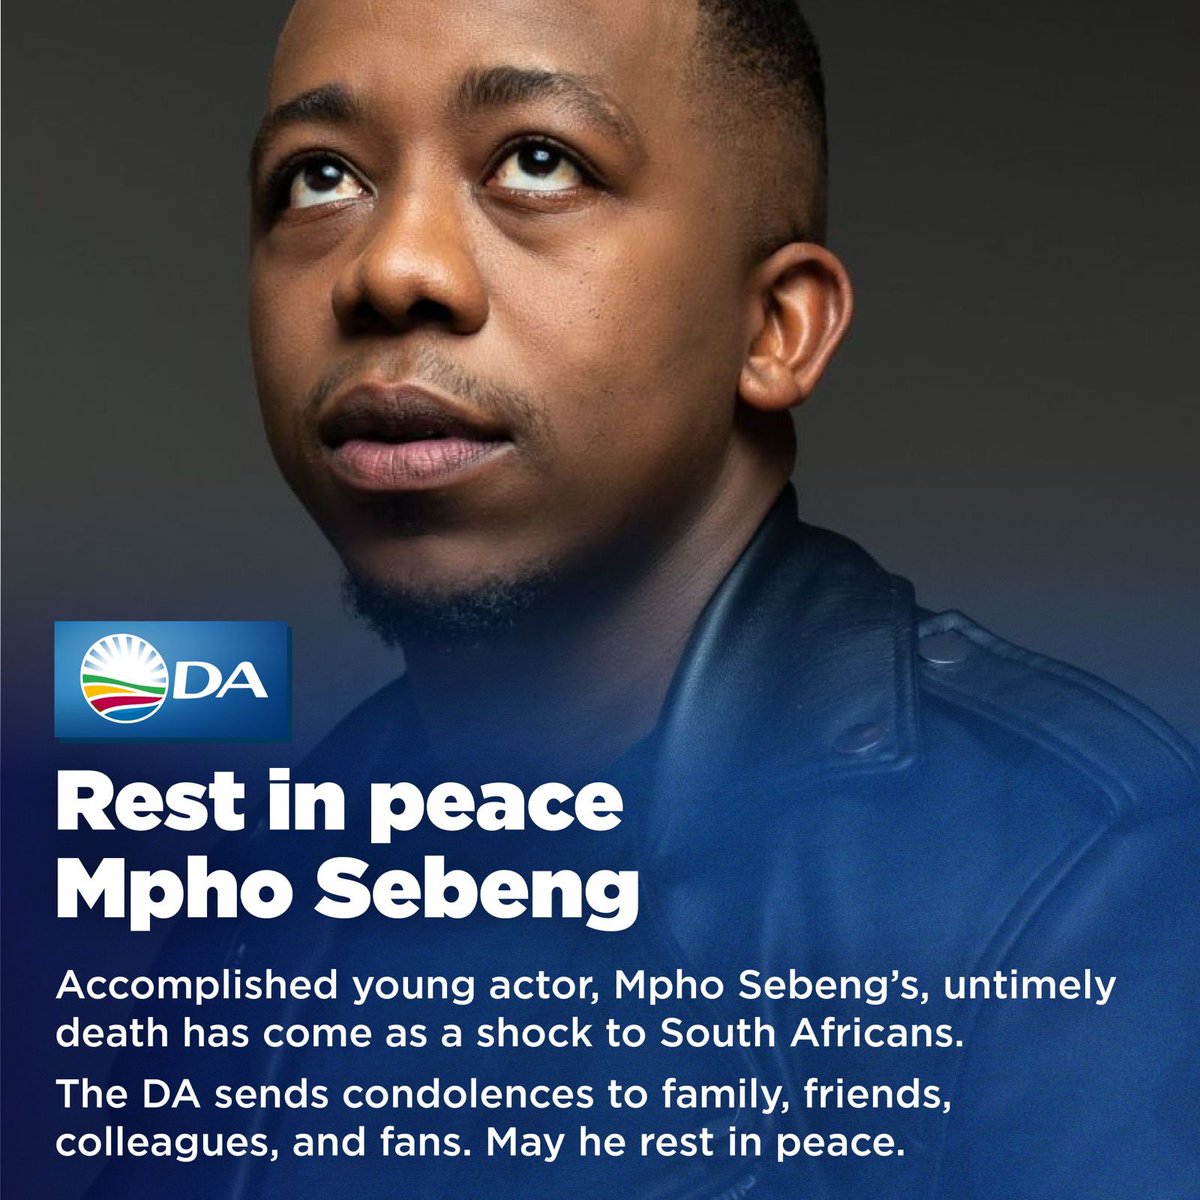 🕊️ Accomplished young actor, Mpho Sebeng’s, untimely death has come as a shock to South Africans.
 
The DA sends condolences to family, friends, colleagues, and fans. May he rest in peace.